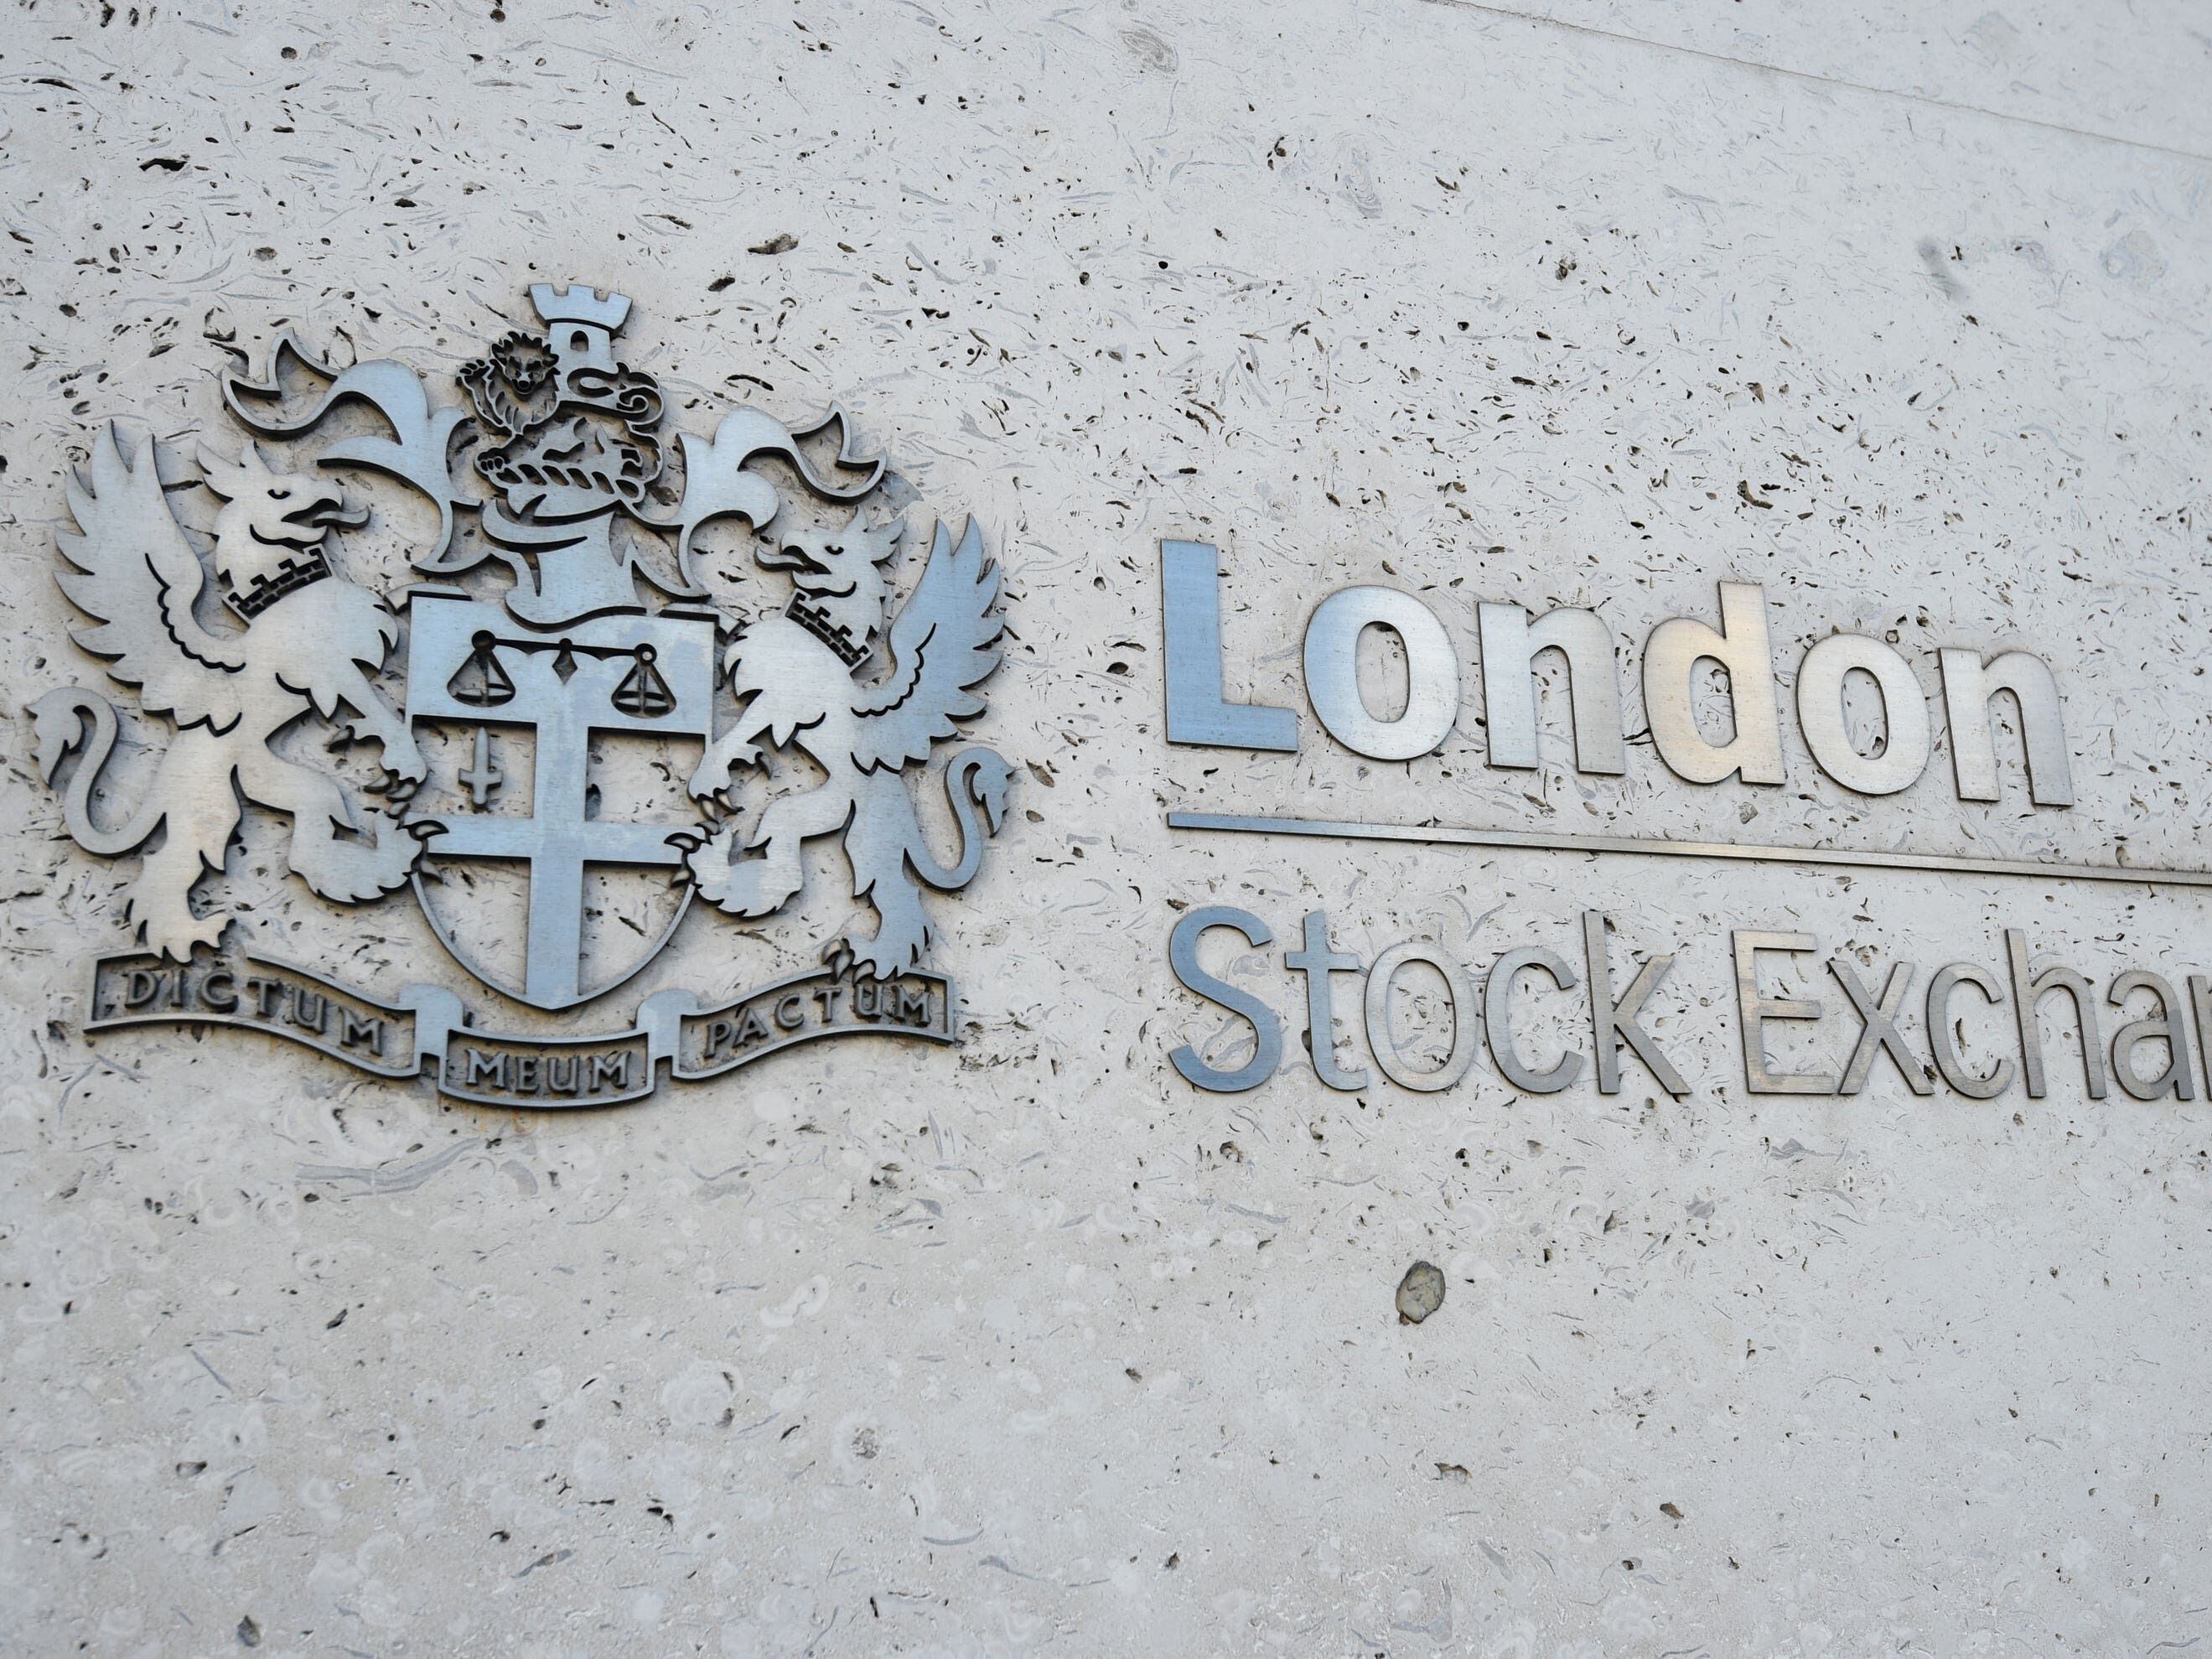 FTSE 100 closes at record high as market conditions improve